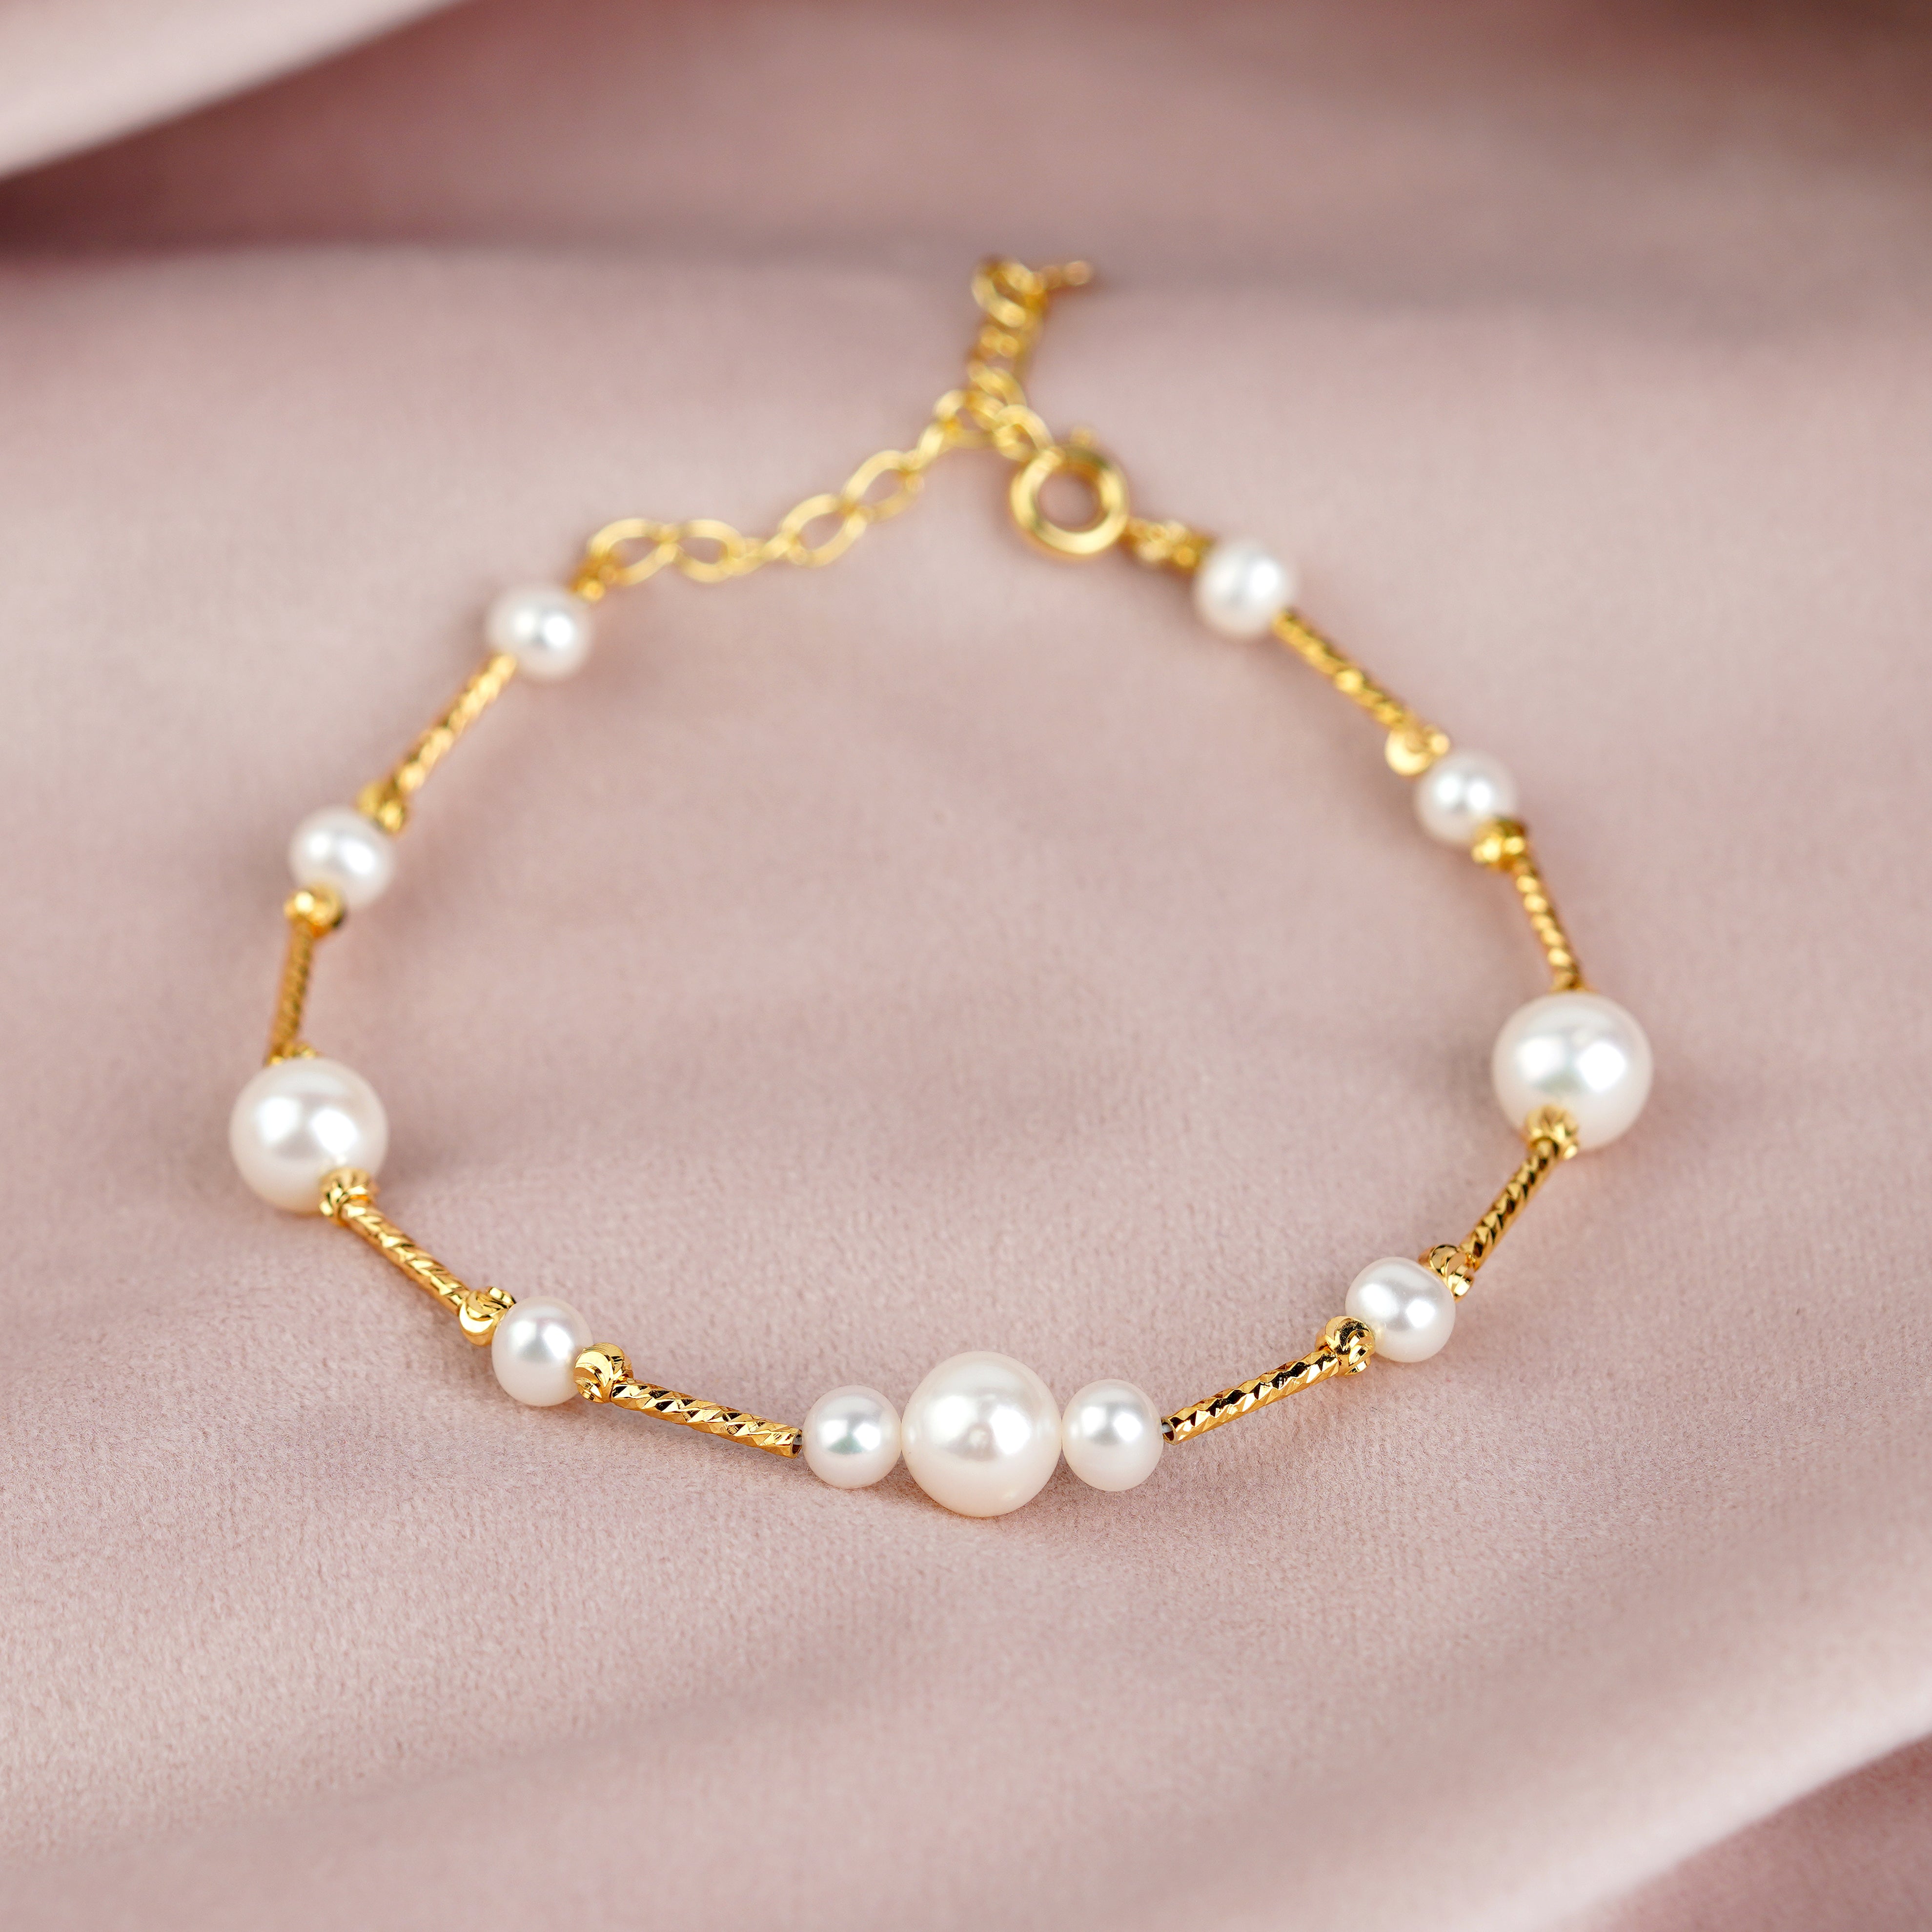 A Bracelet of Pure Radiance White Freshwater Pearls